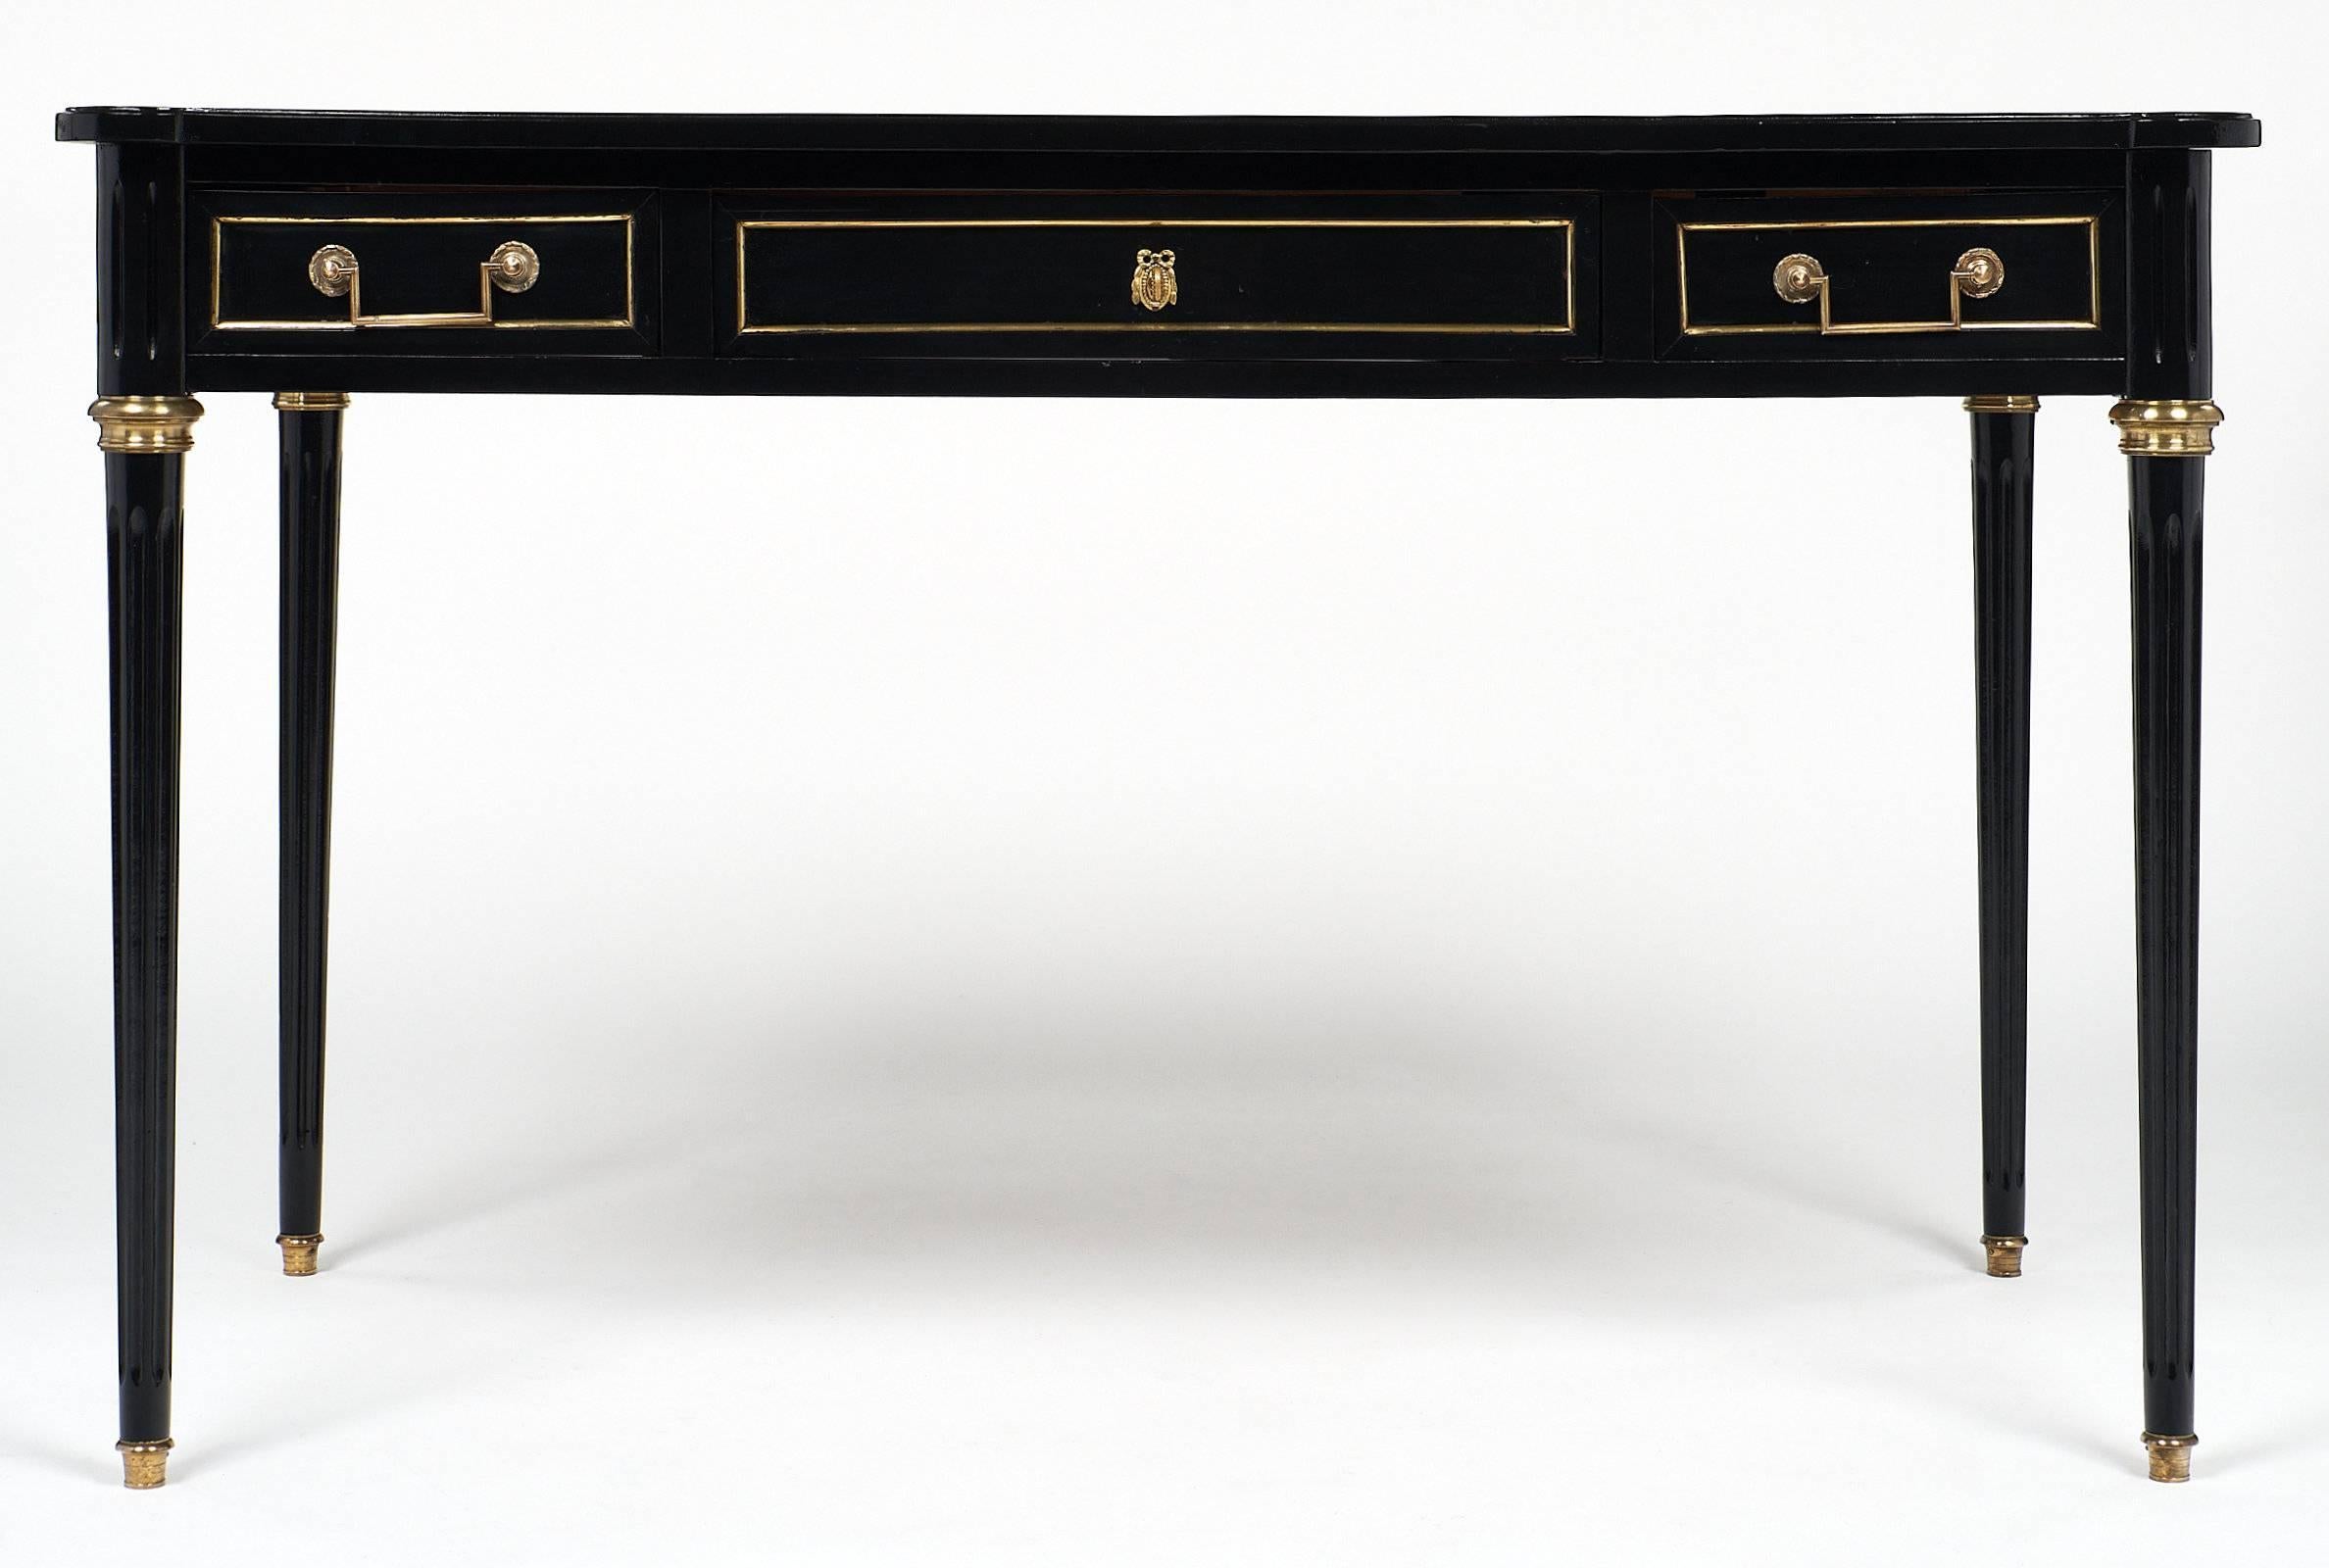 French antique Louis XVI style desk with brown-gray leather top and original brass trim, hardware, and decor. The mahogany wood is ebonized and finished with a lustrous French polish. This piece has two small drawers on either side of one large